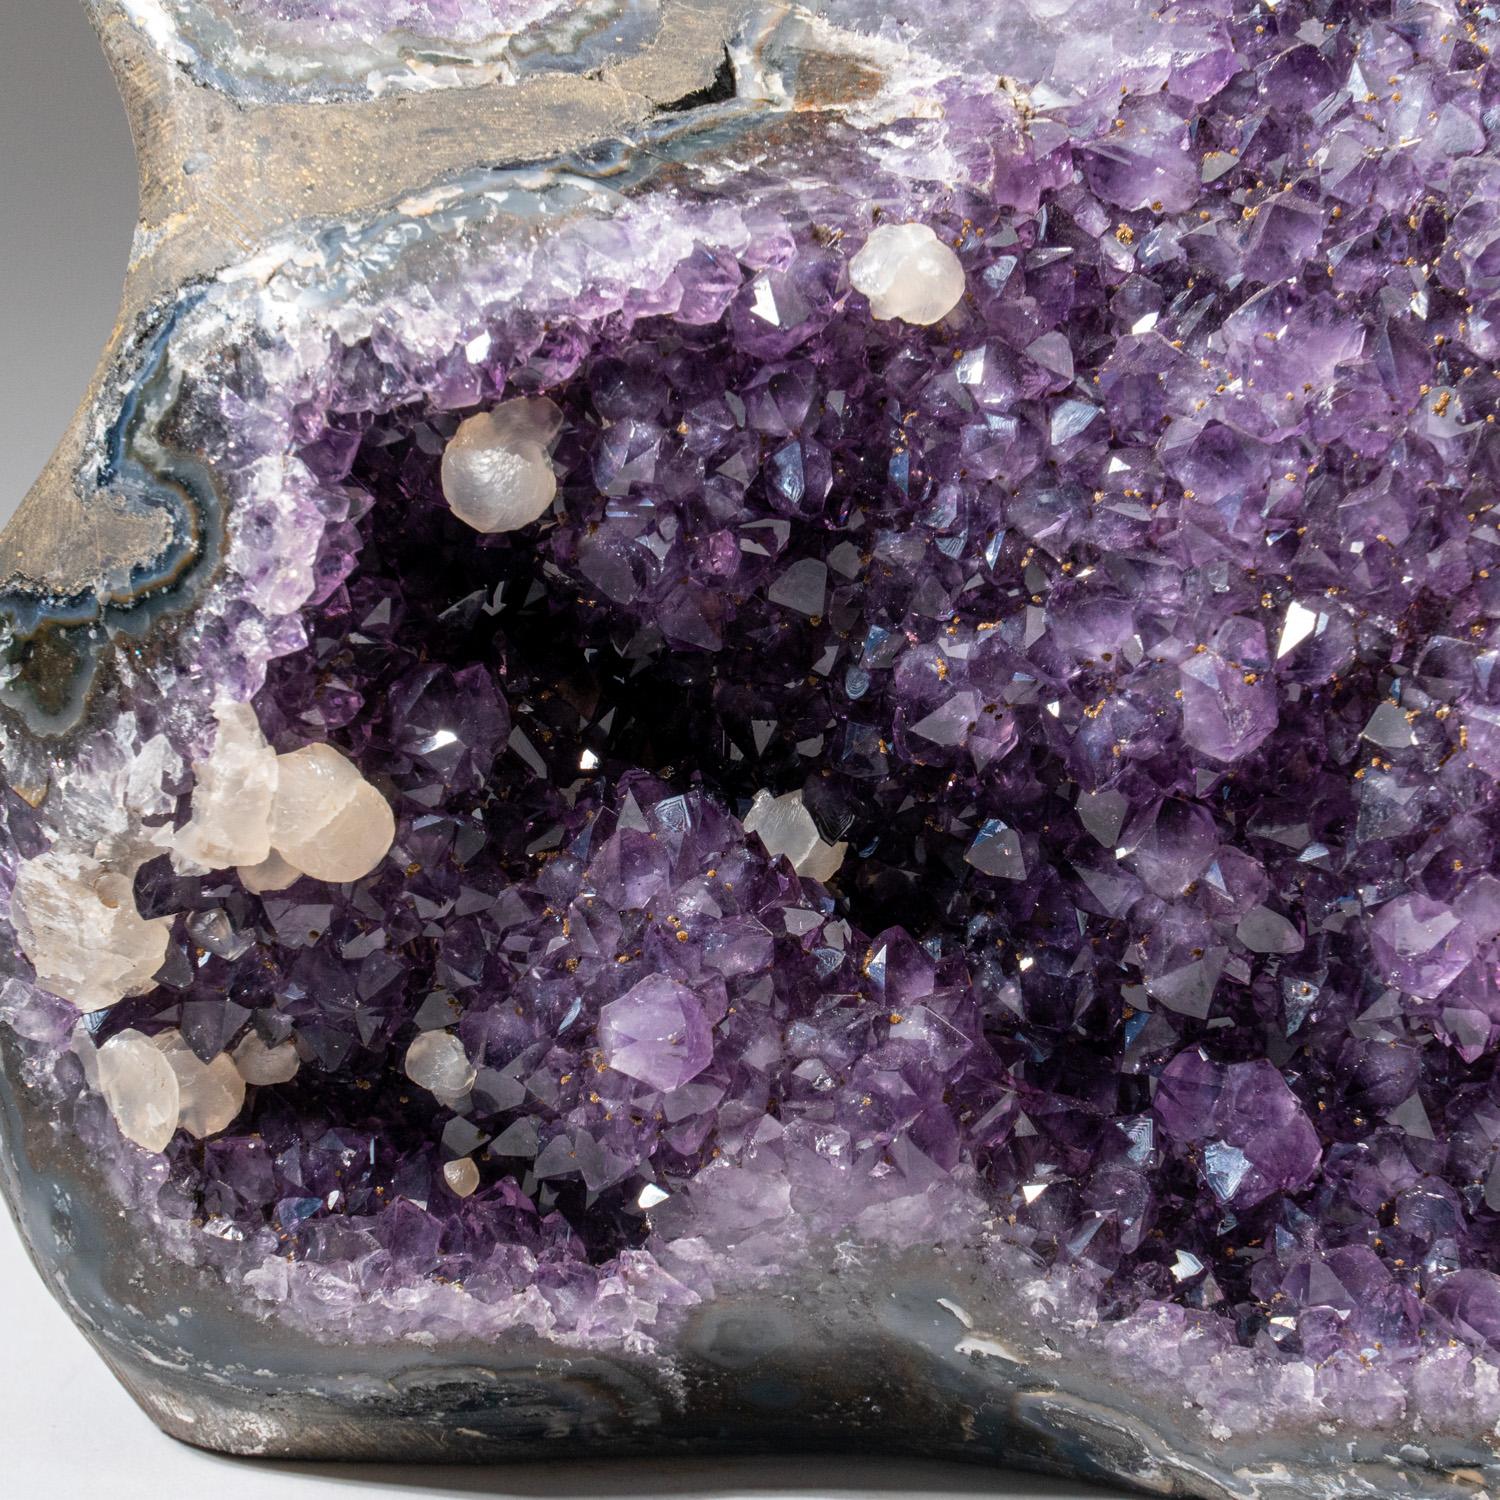 AAA-quality Amethyst cluster geode accented with several small calcite crystals. This specimen is lined with lustrous crystallized Amethyst variety quartz crystals, transparent to translucent, with deep grape purple color and highly reflective